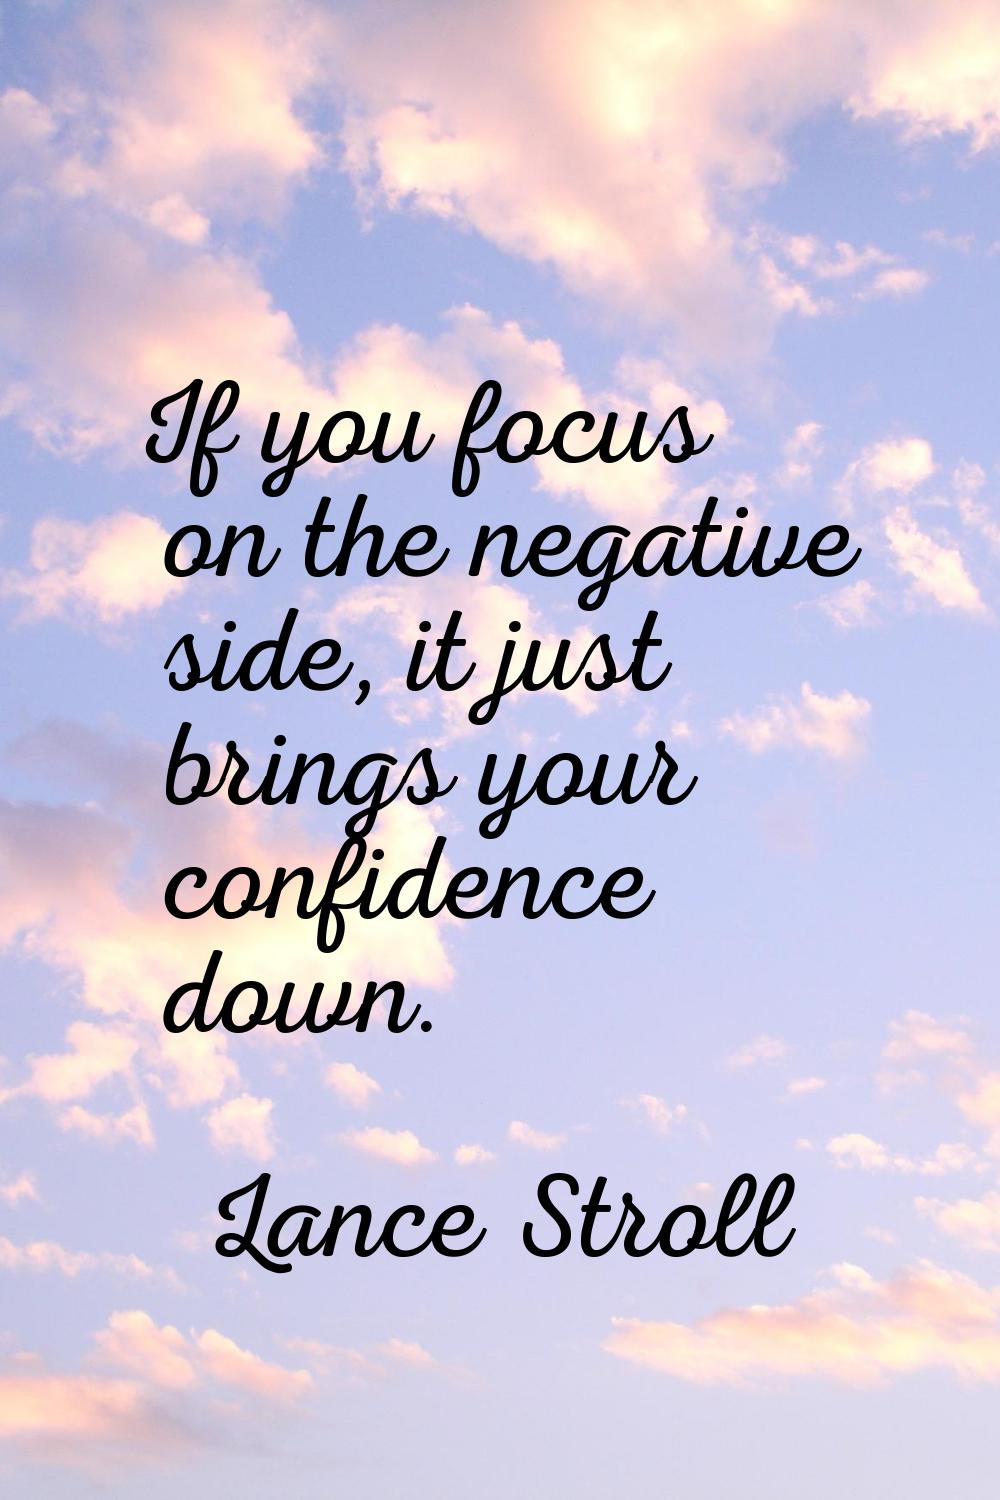 If you focus on the negative side, it just brings your confidence down.